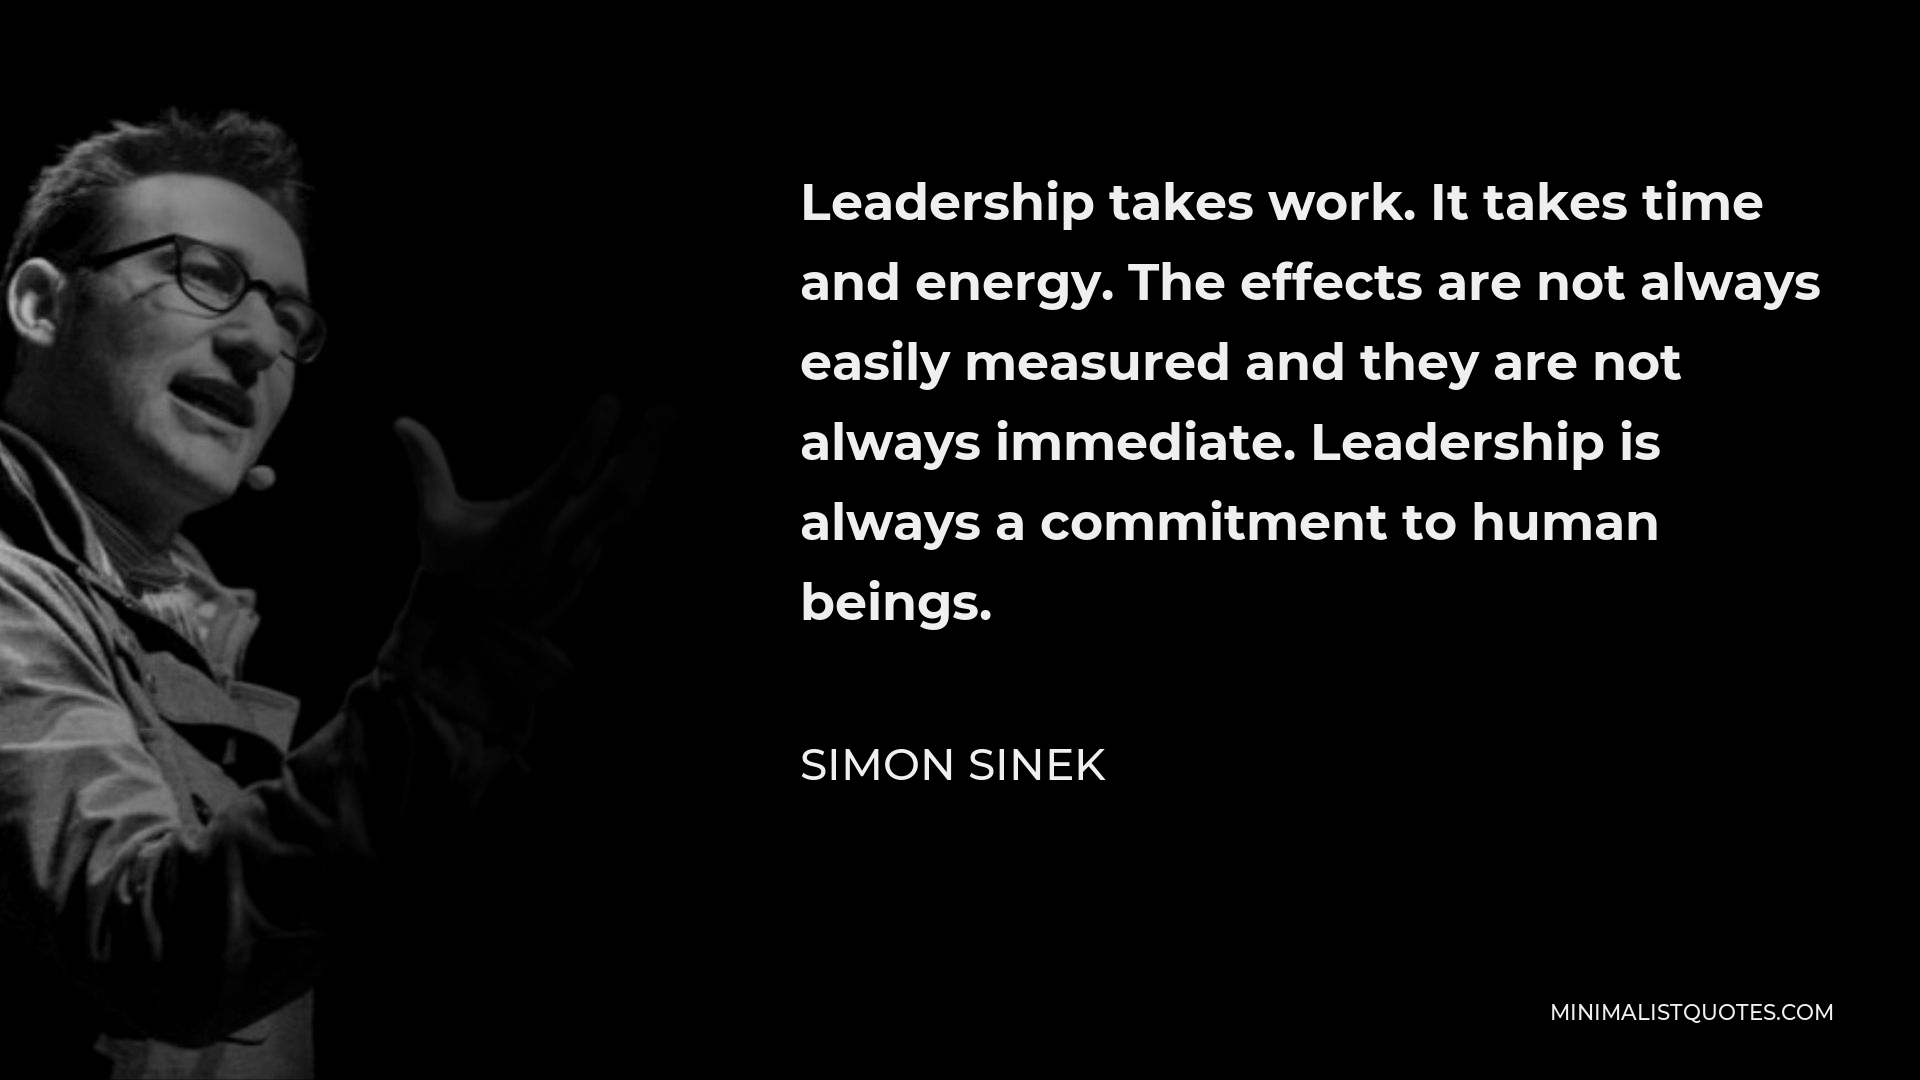 Simon Sinek Quote - Leadership takes work. It takes time and energy. The effects are not always easily measured and they are not always immediate. Leadership is always a commitment to human beings.